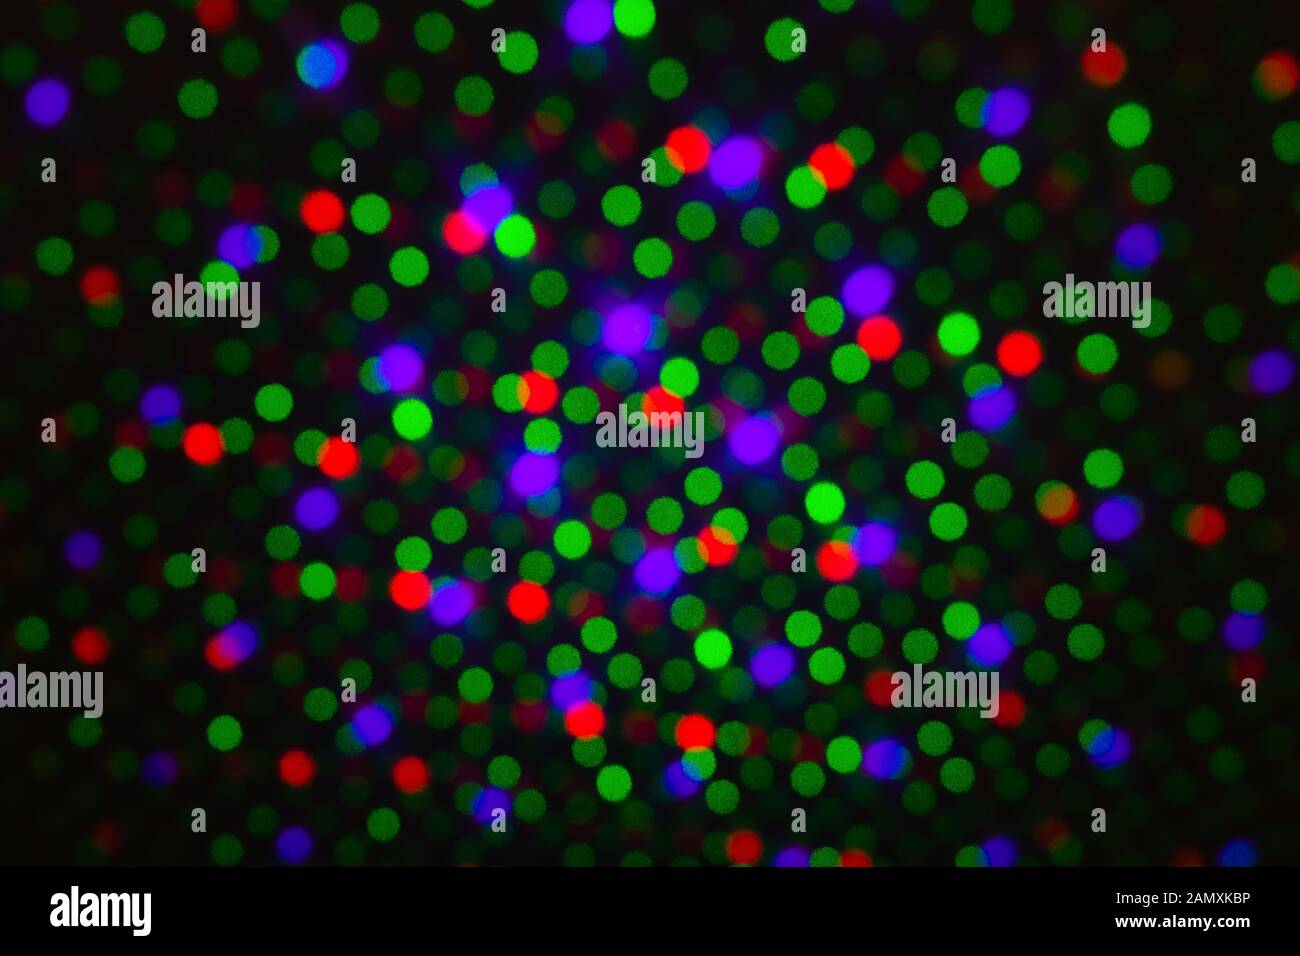 Abstract dot defocus background backdrop, rainbow colored green red violet round glitter on black background. Illumination blurry lights, abstract Stock Photo